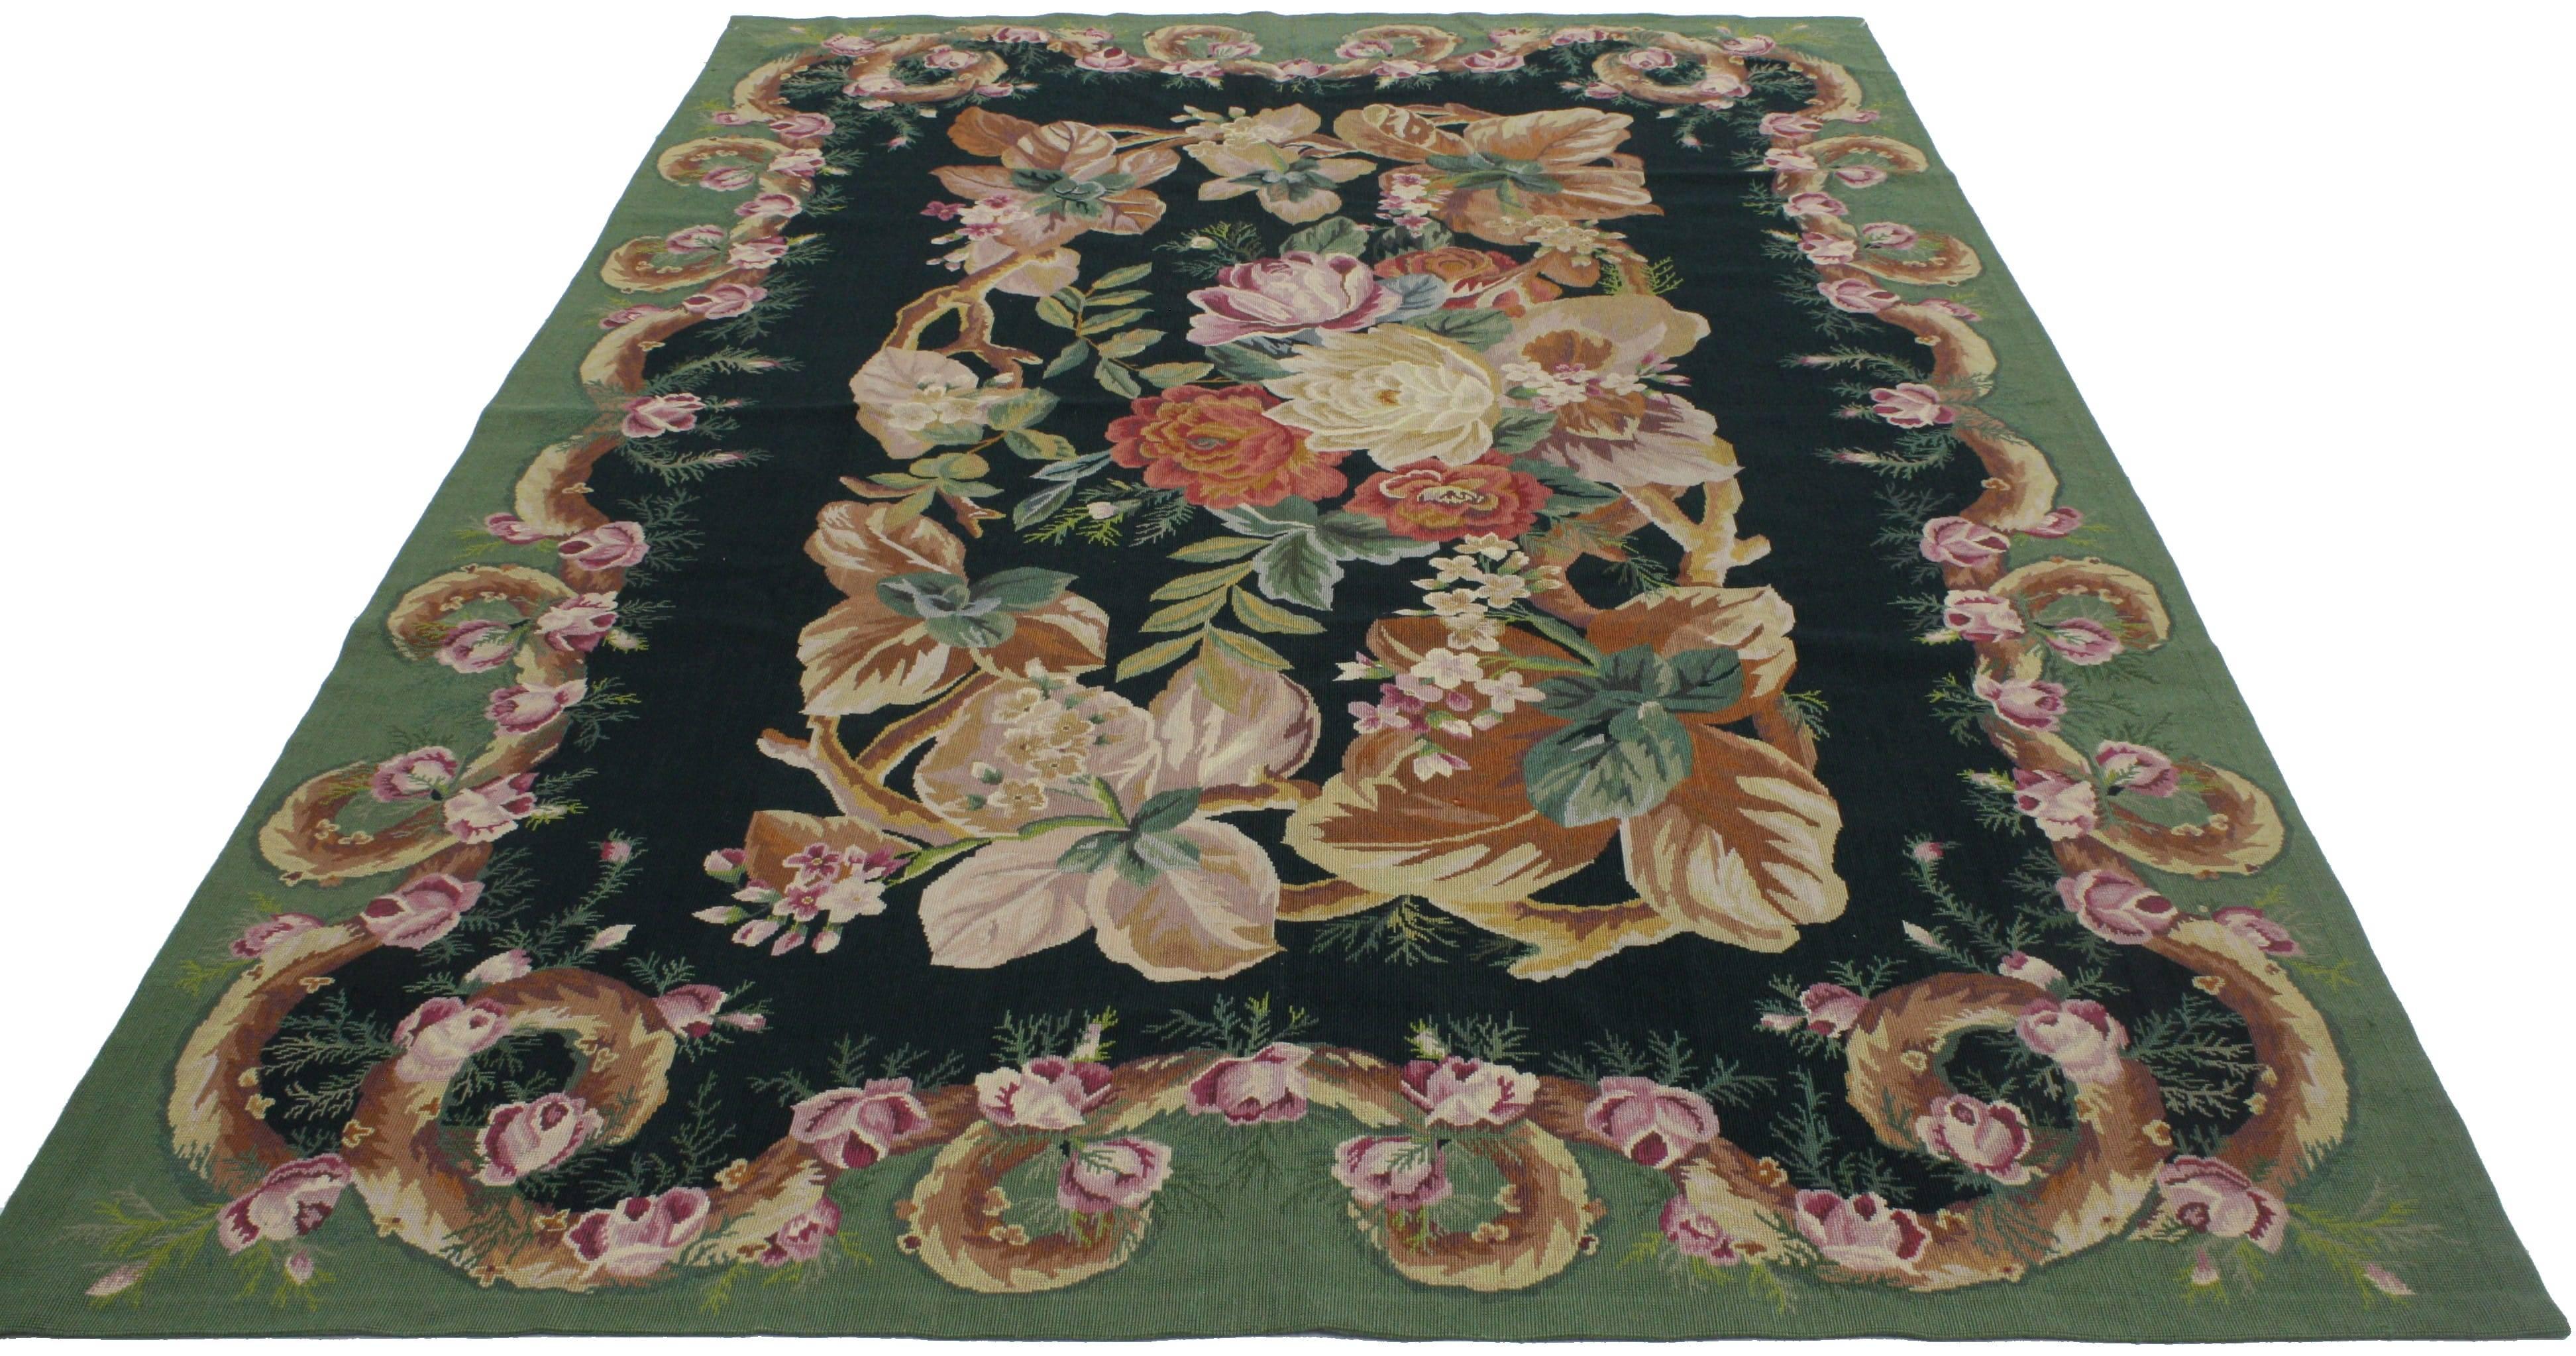 Hand-Woven Vintage Chinese Aubusson Style Needlepoint Rug with French Provincial Style